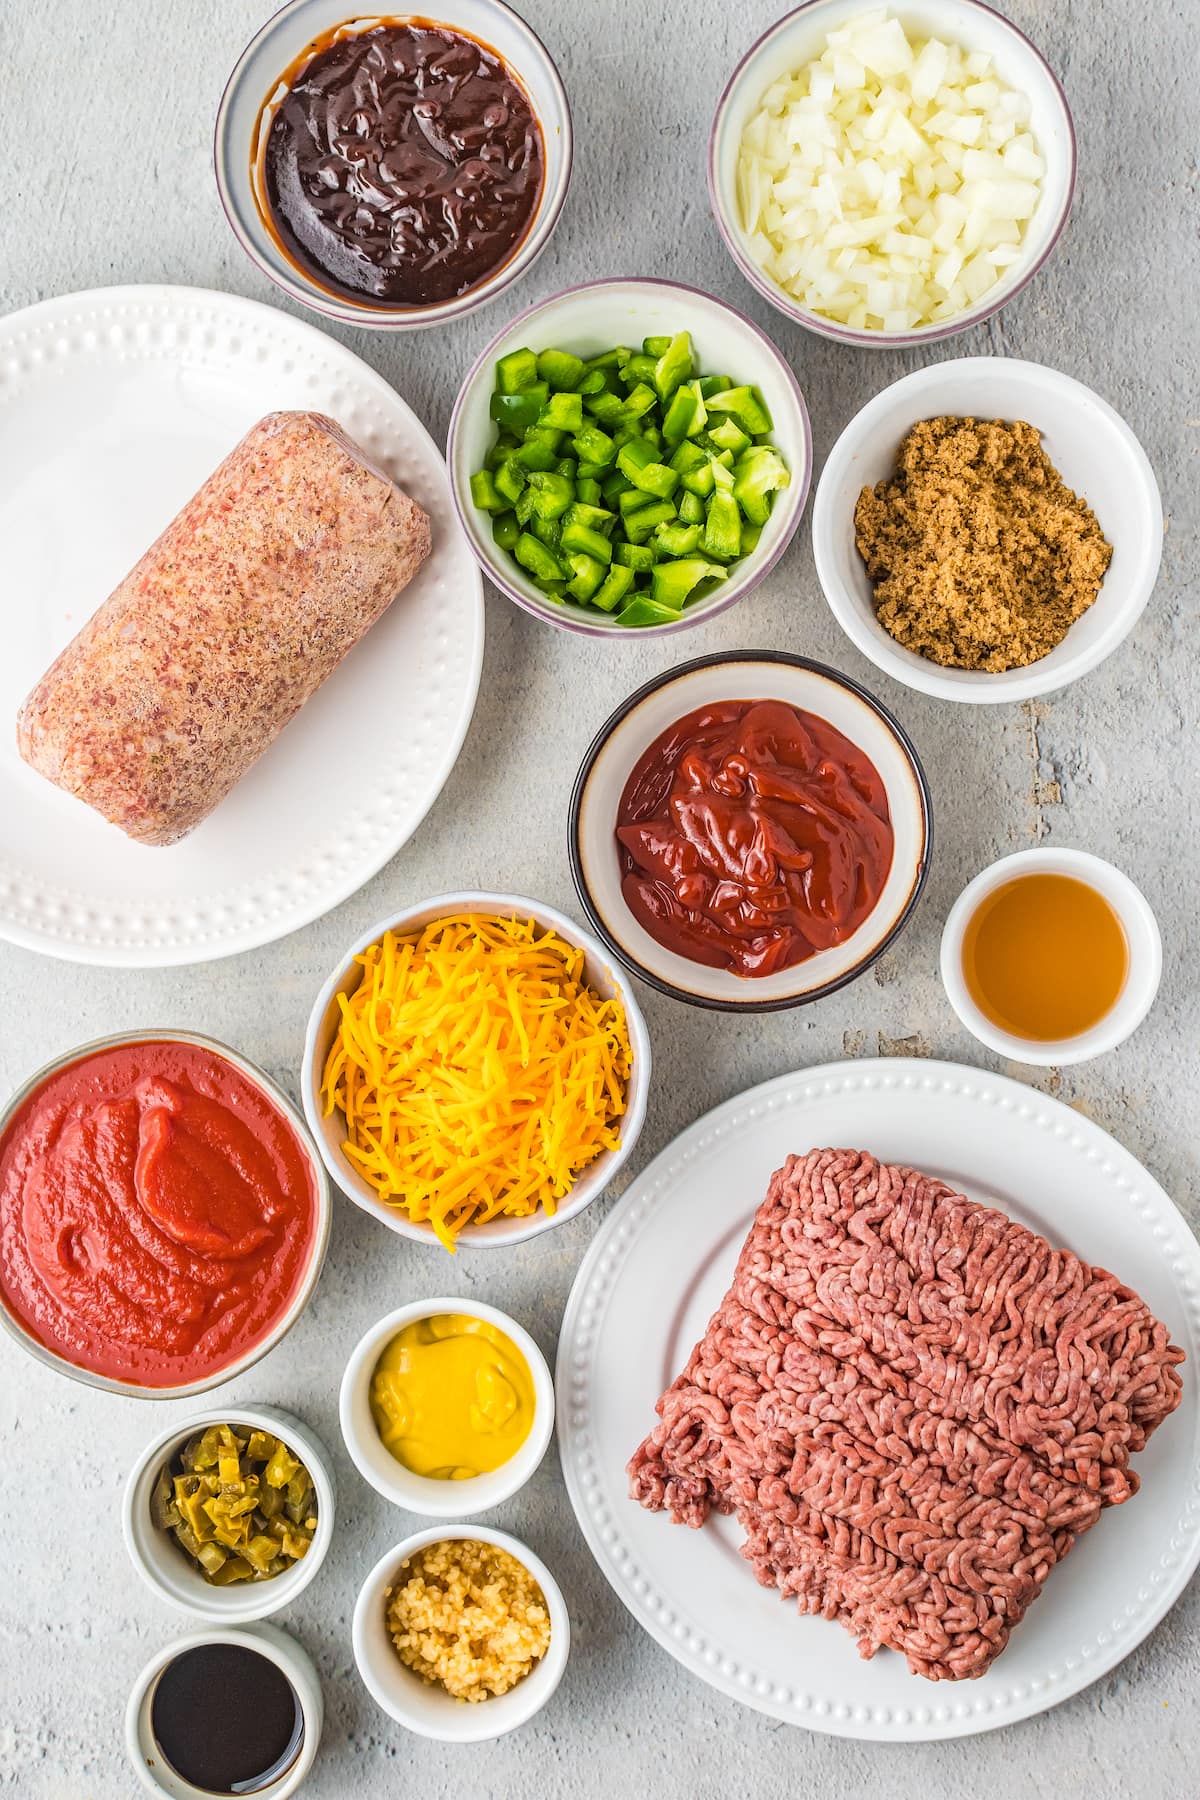 Ingredients to make sloppy joes like ground beef, ground sausage, ketchup, bbq sauce, tomato sauce, chopped peppers, chopped onions, and shredded cheese